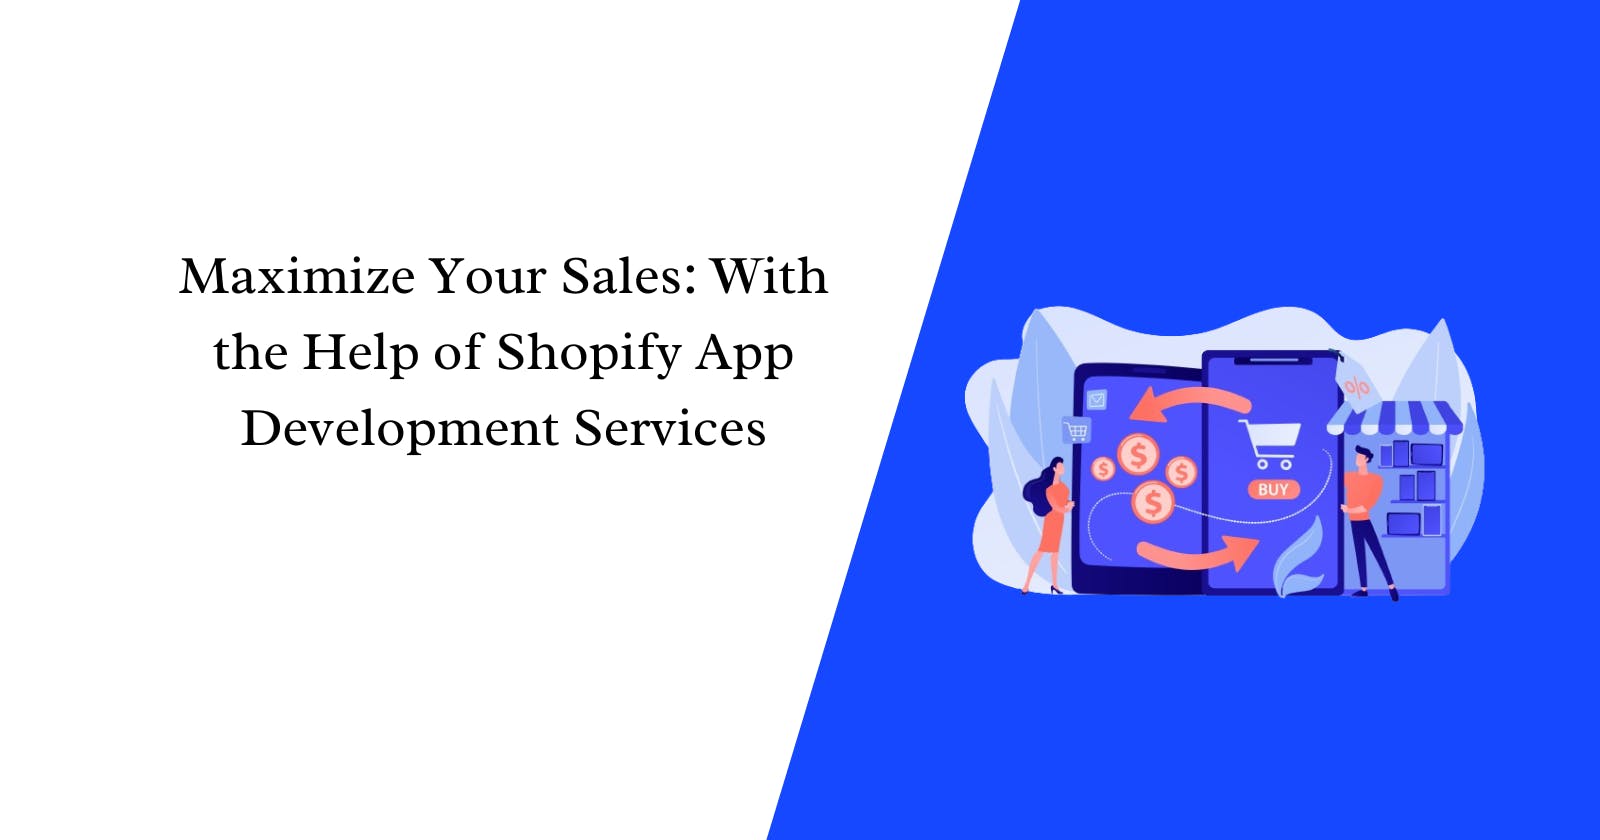 Maximize Your Sales: With the Help of Shopify App Development Services